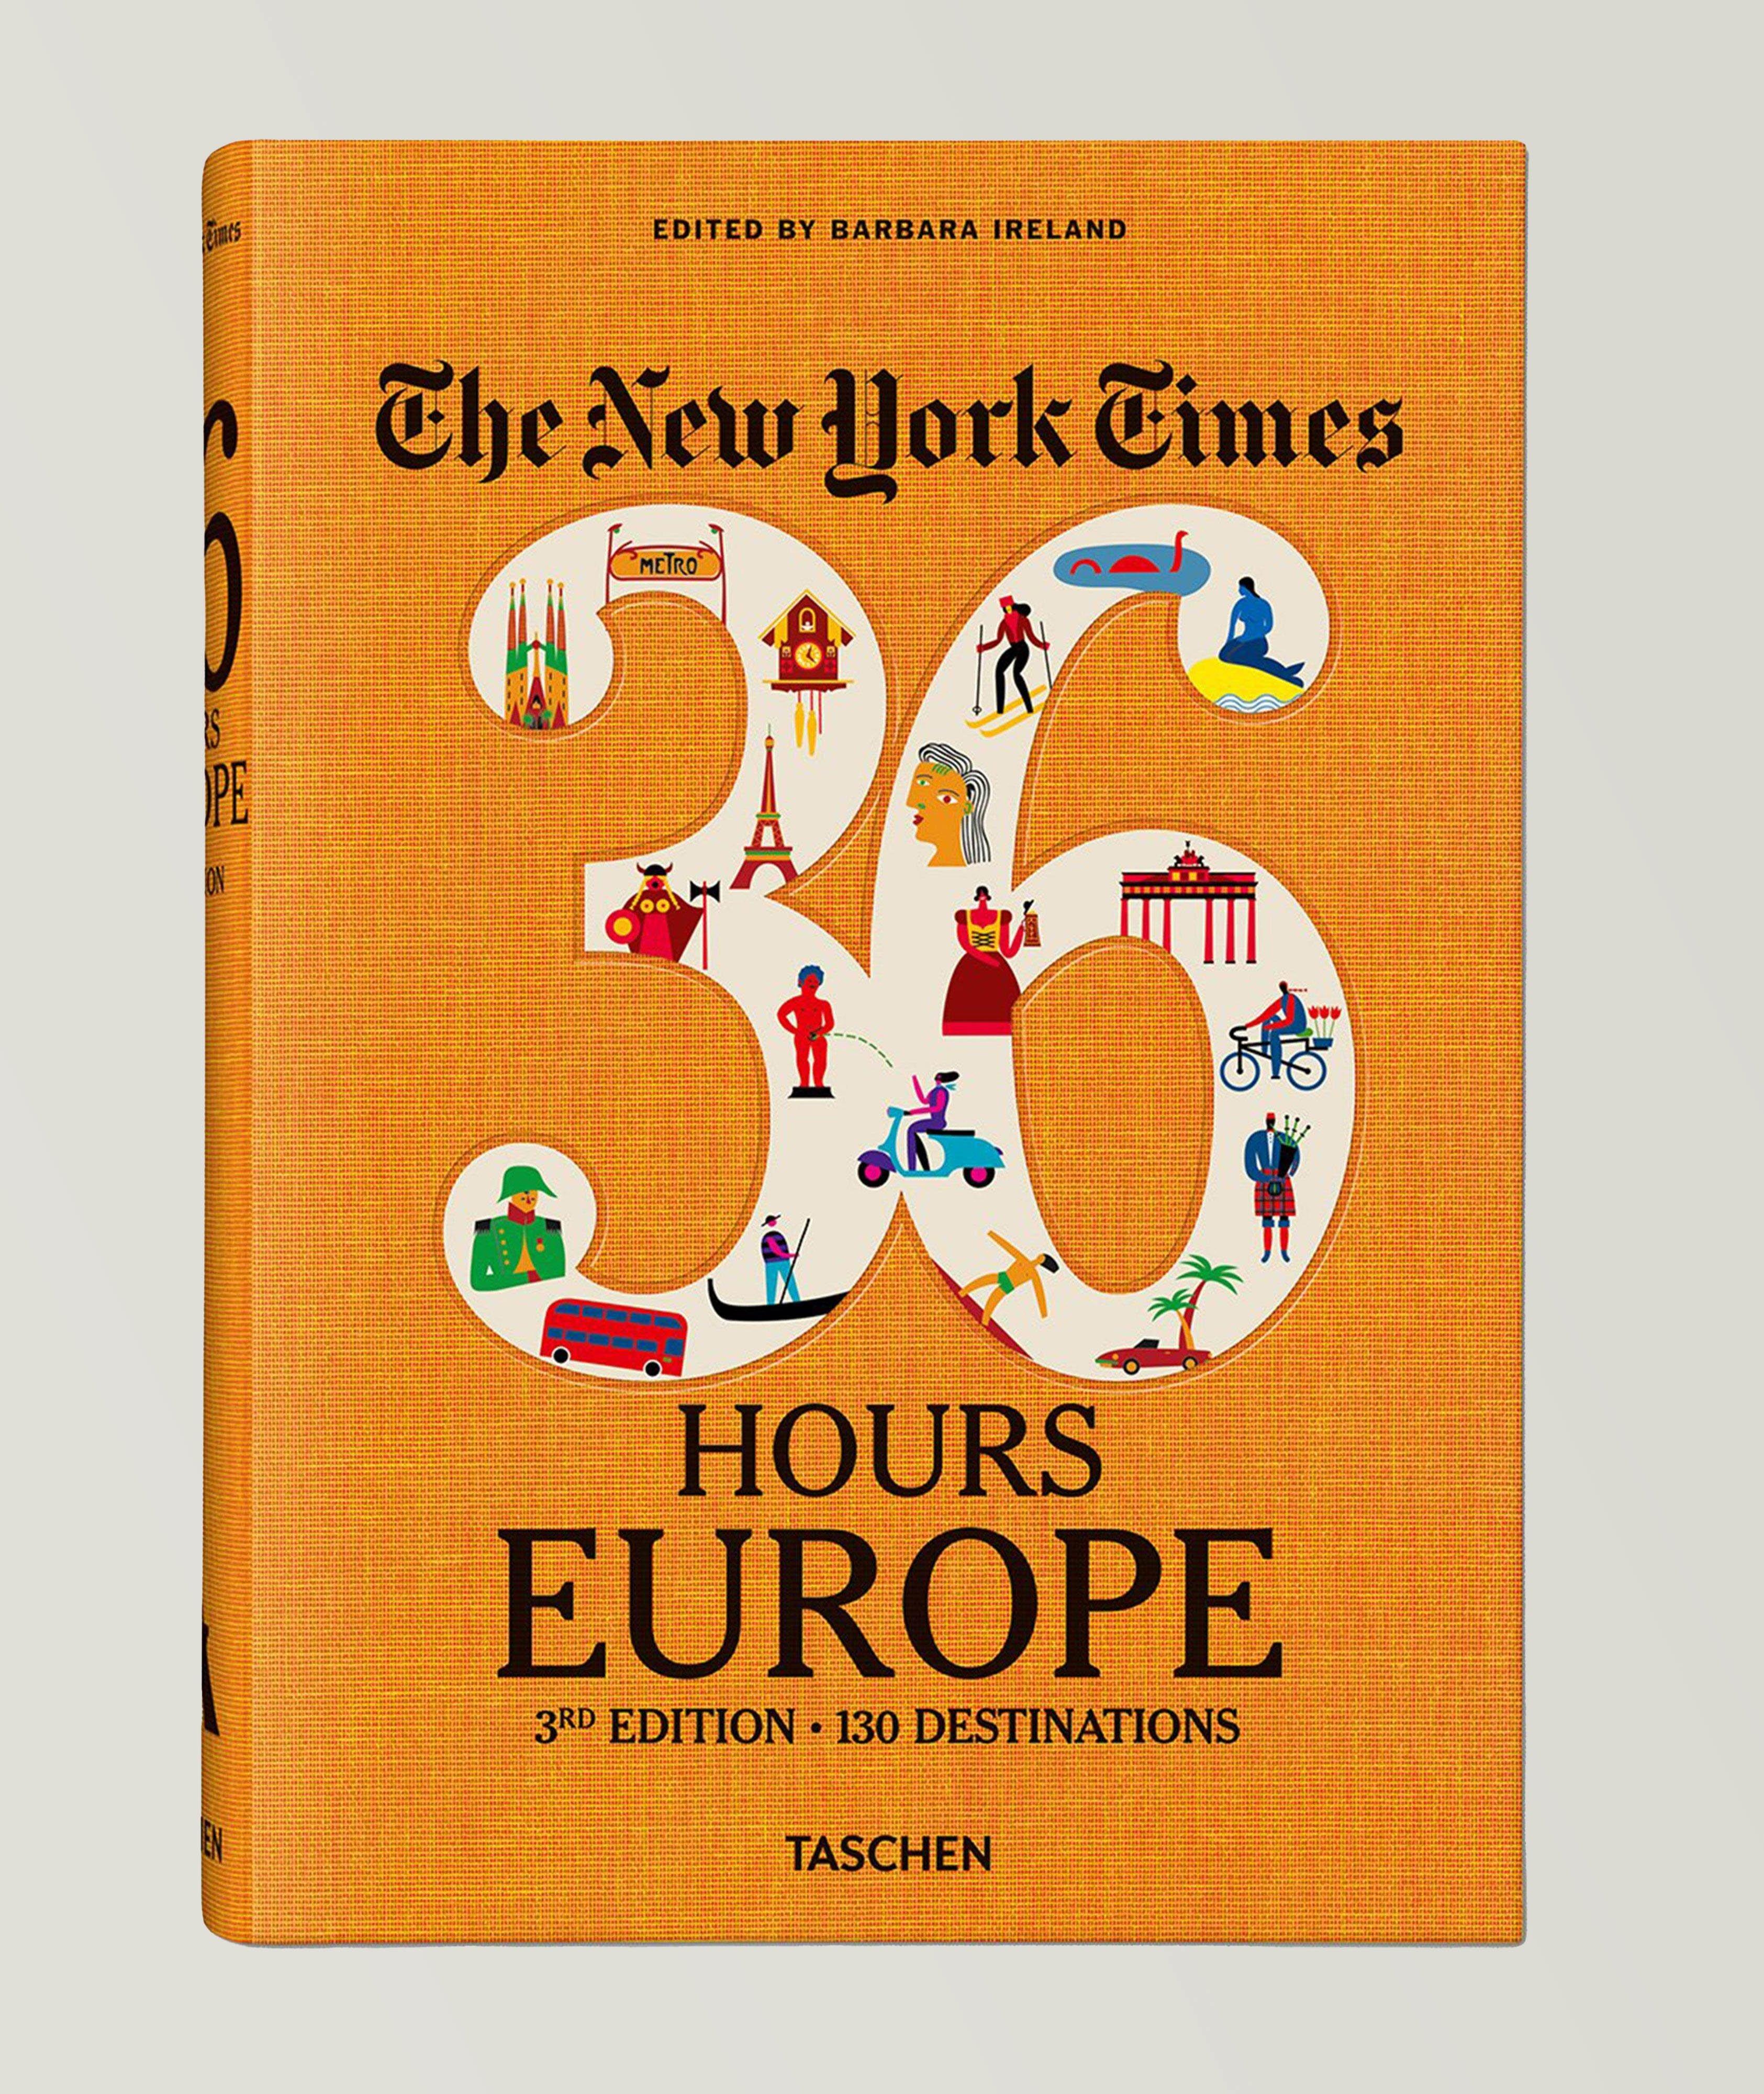 Livre « The New York Times : 36 Hours Europe » image 0